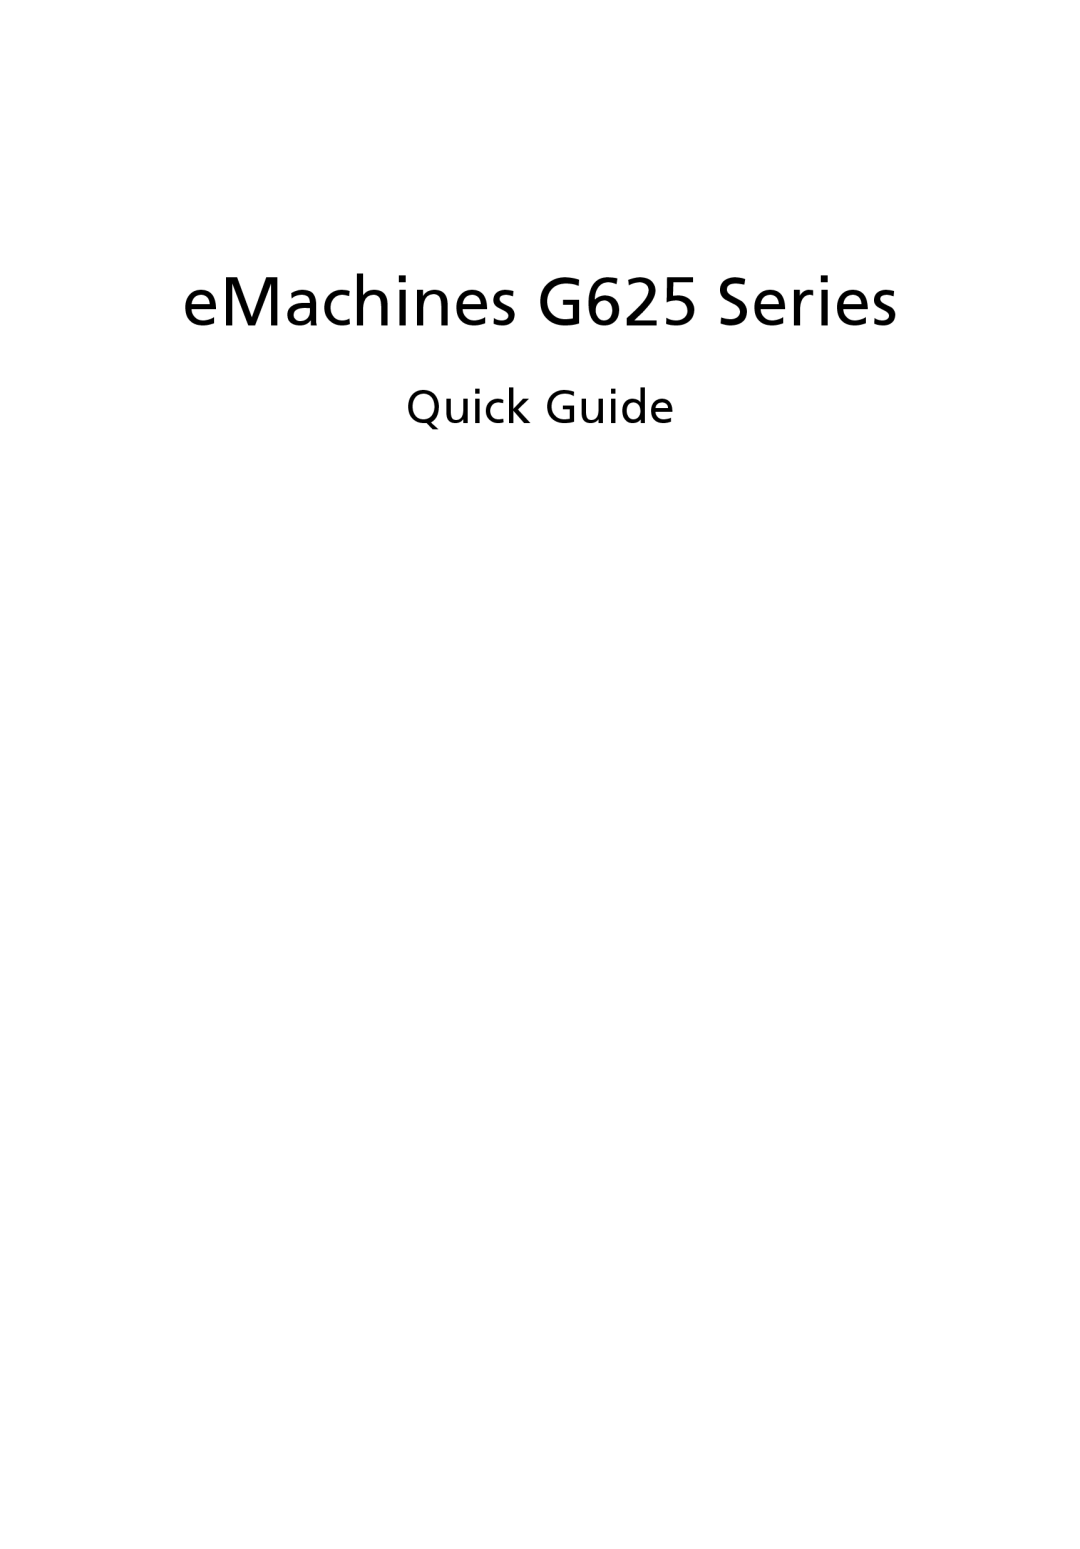 eMachines manual Quick Guide, eMachines G625 Series 